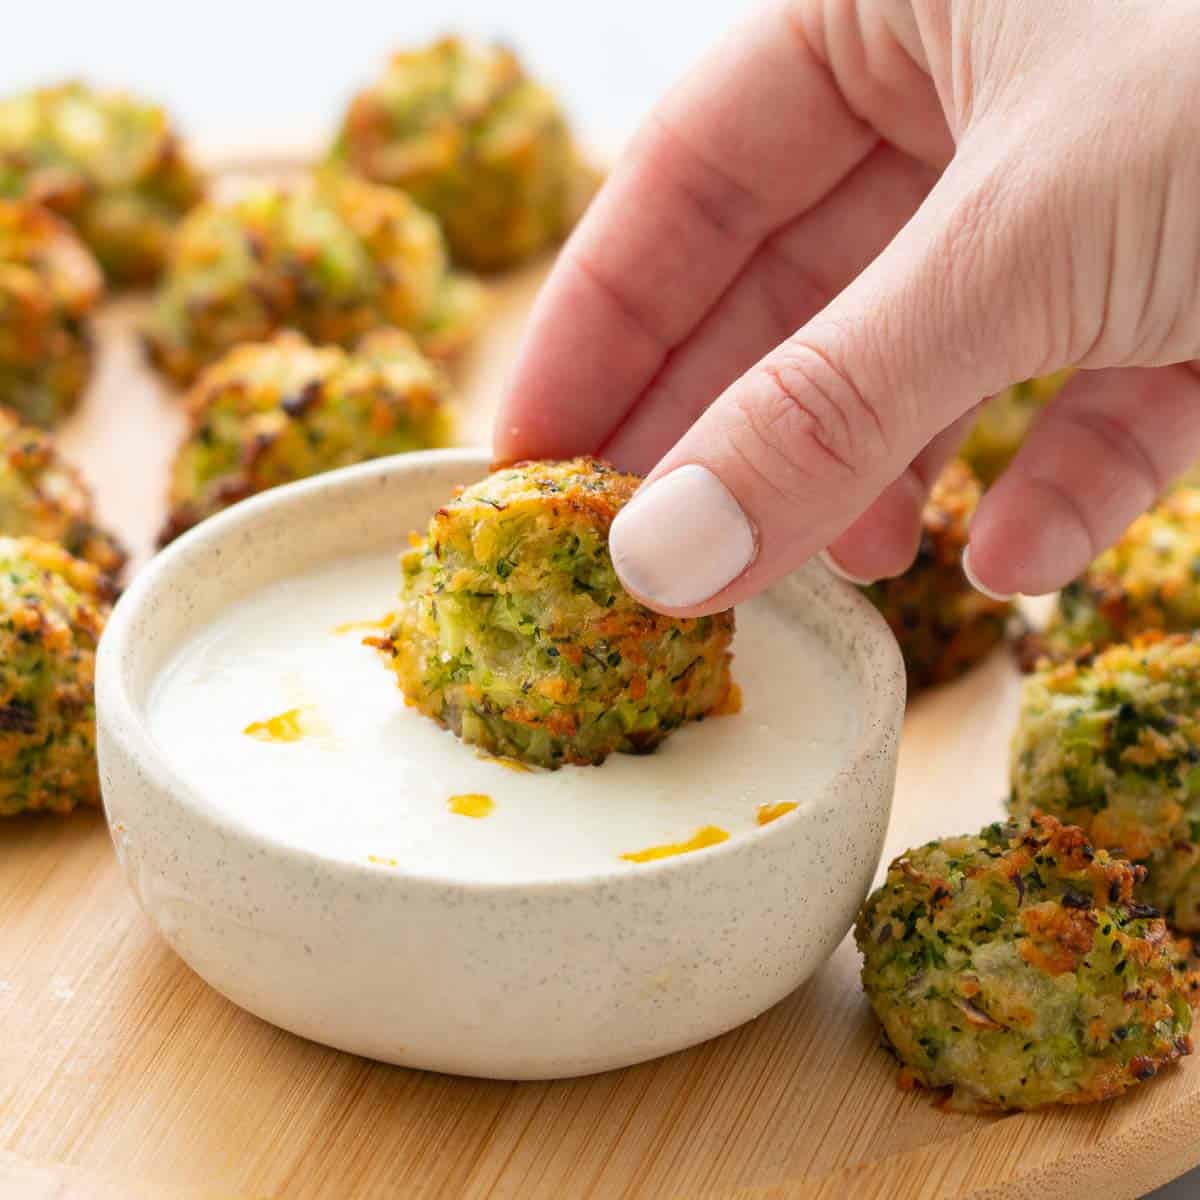 A hand dunking a broccoli bite into a ramekin of yoghurt and lemon dip which is sitting amongst more broccoli bites on a wooden serving board 